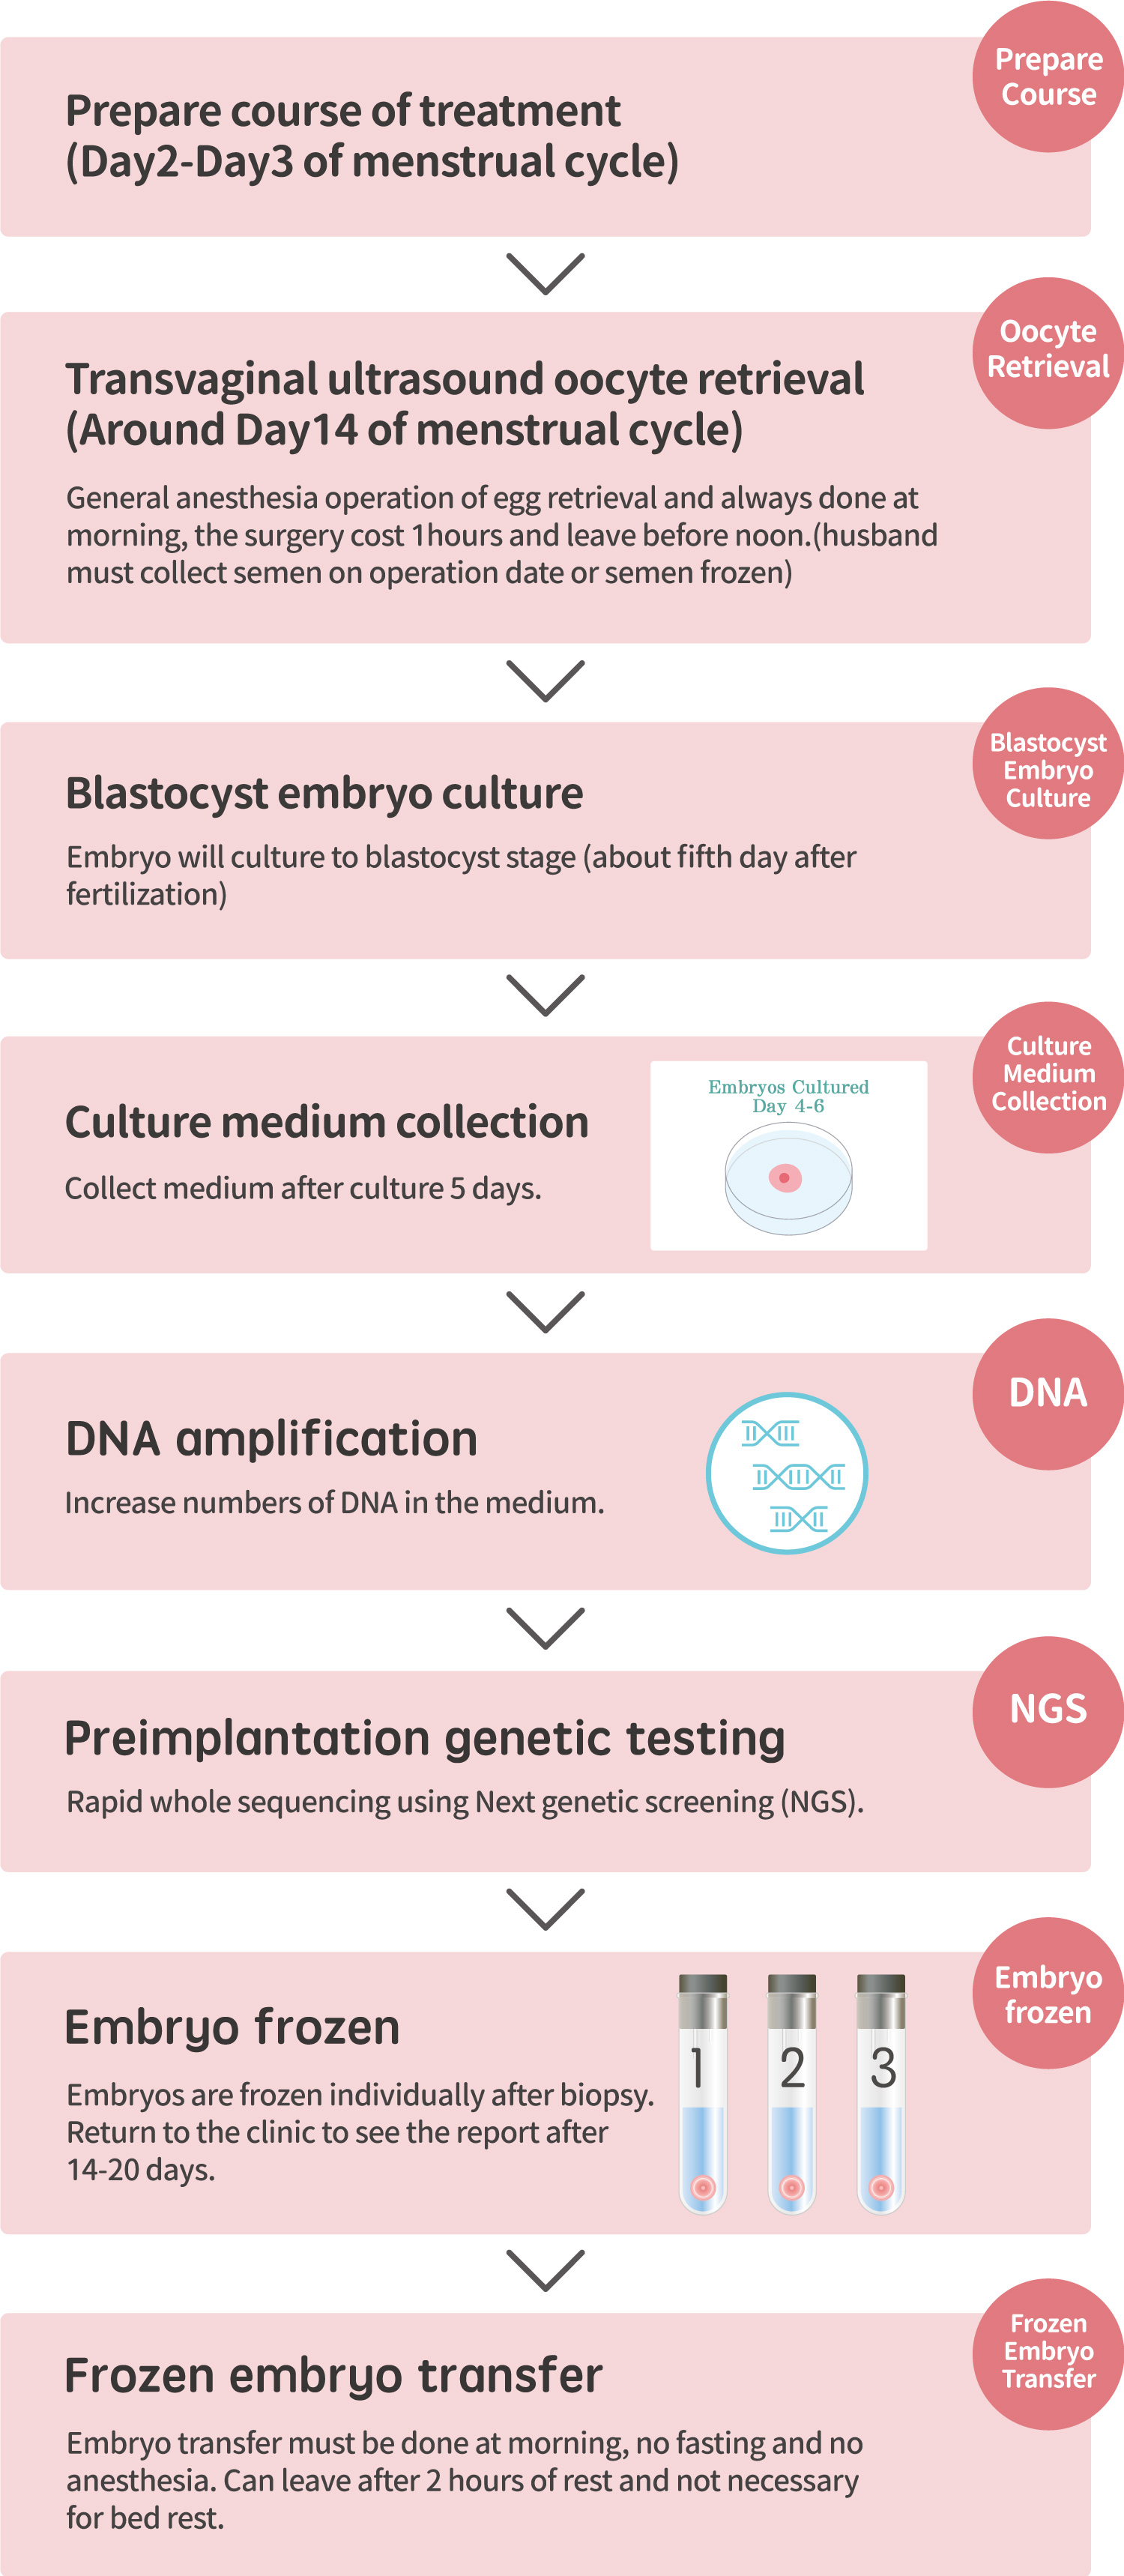 Pre Implantation Genetic Testing For Aneuploidy Pgt A An An Ivf Center Anan Ivf 5594